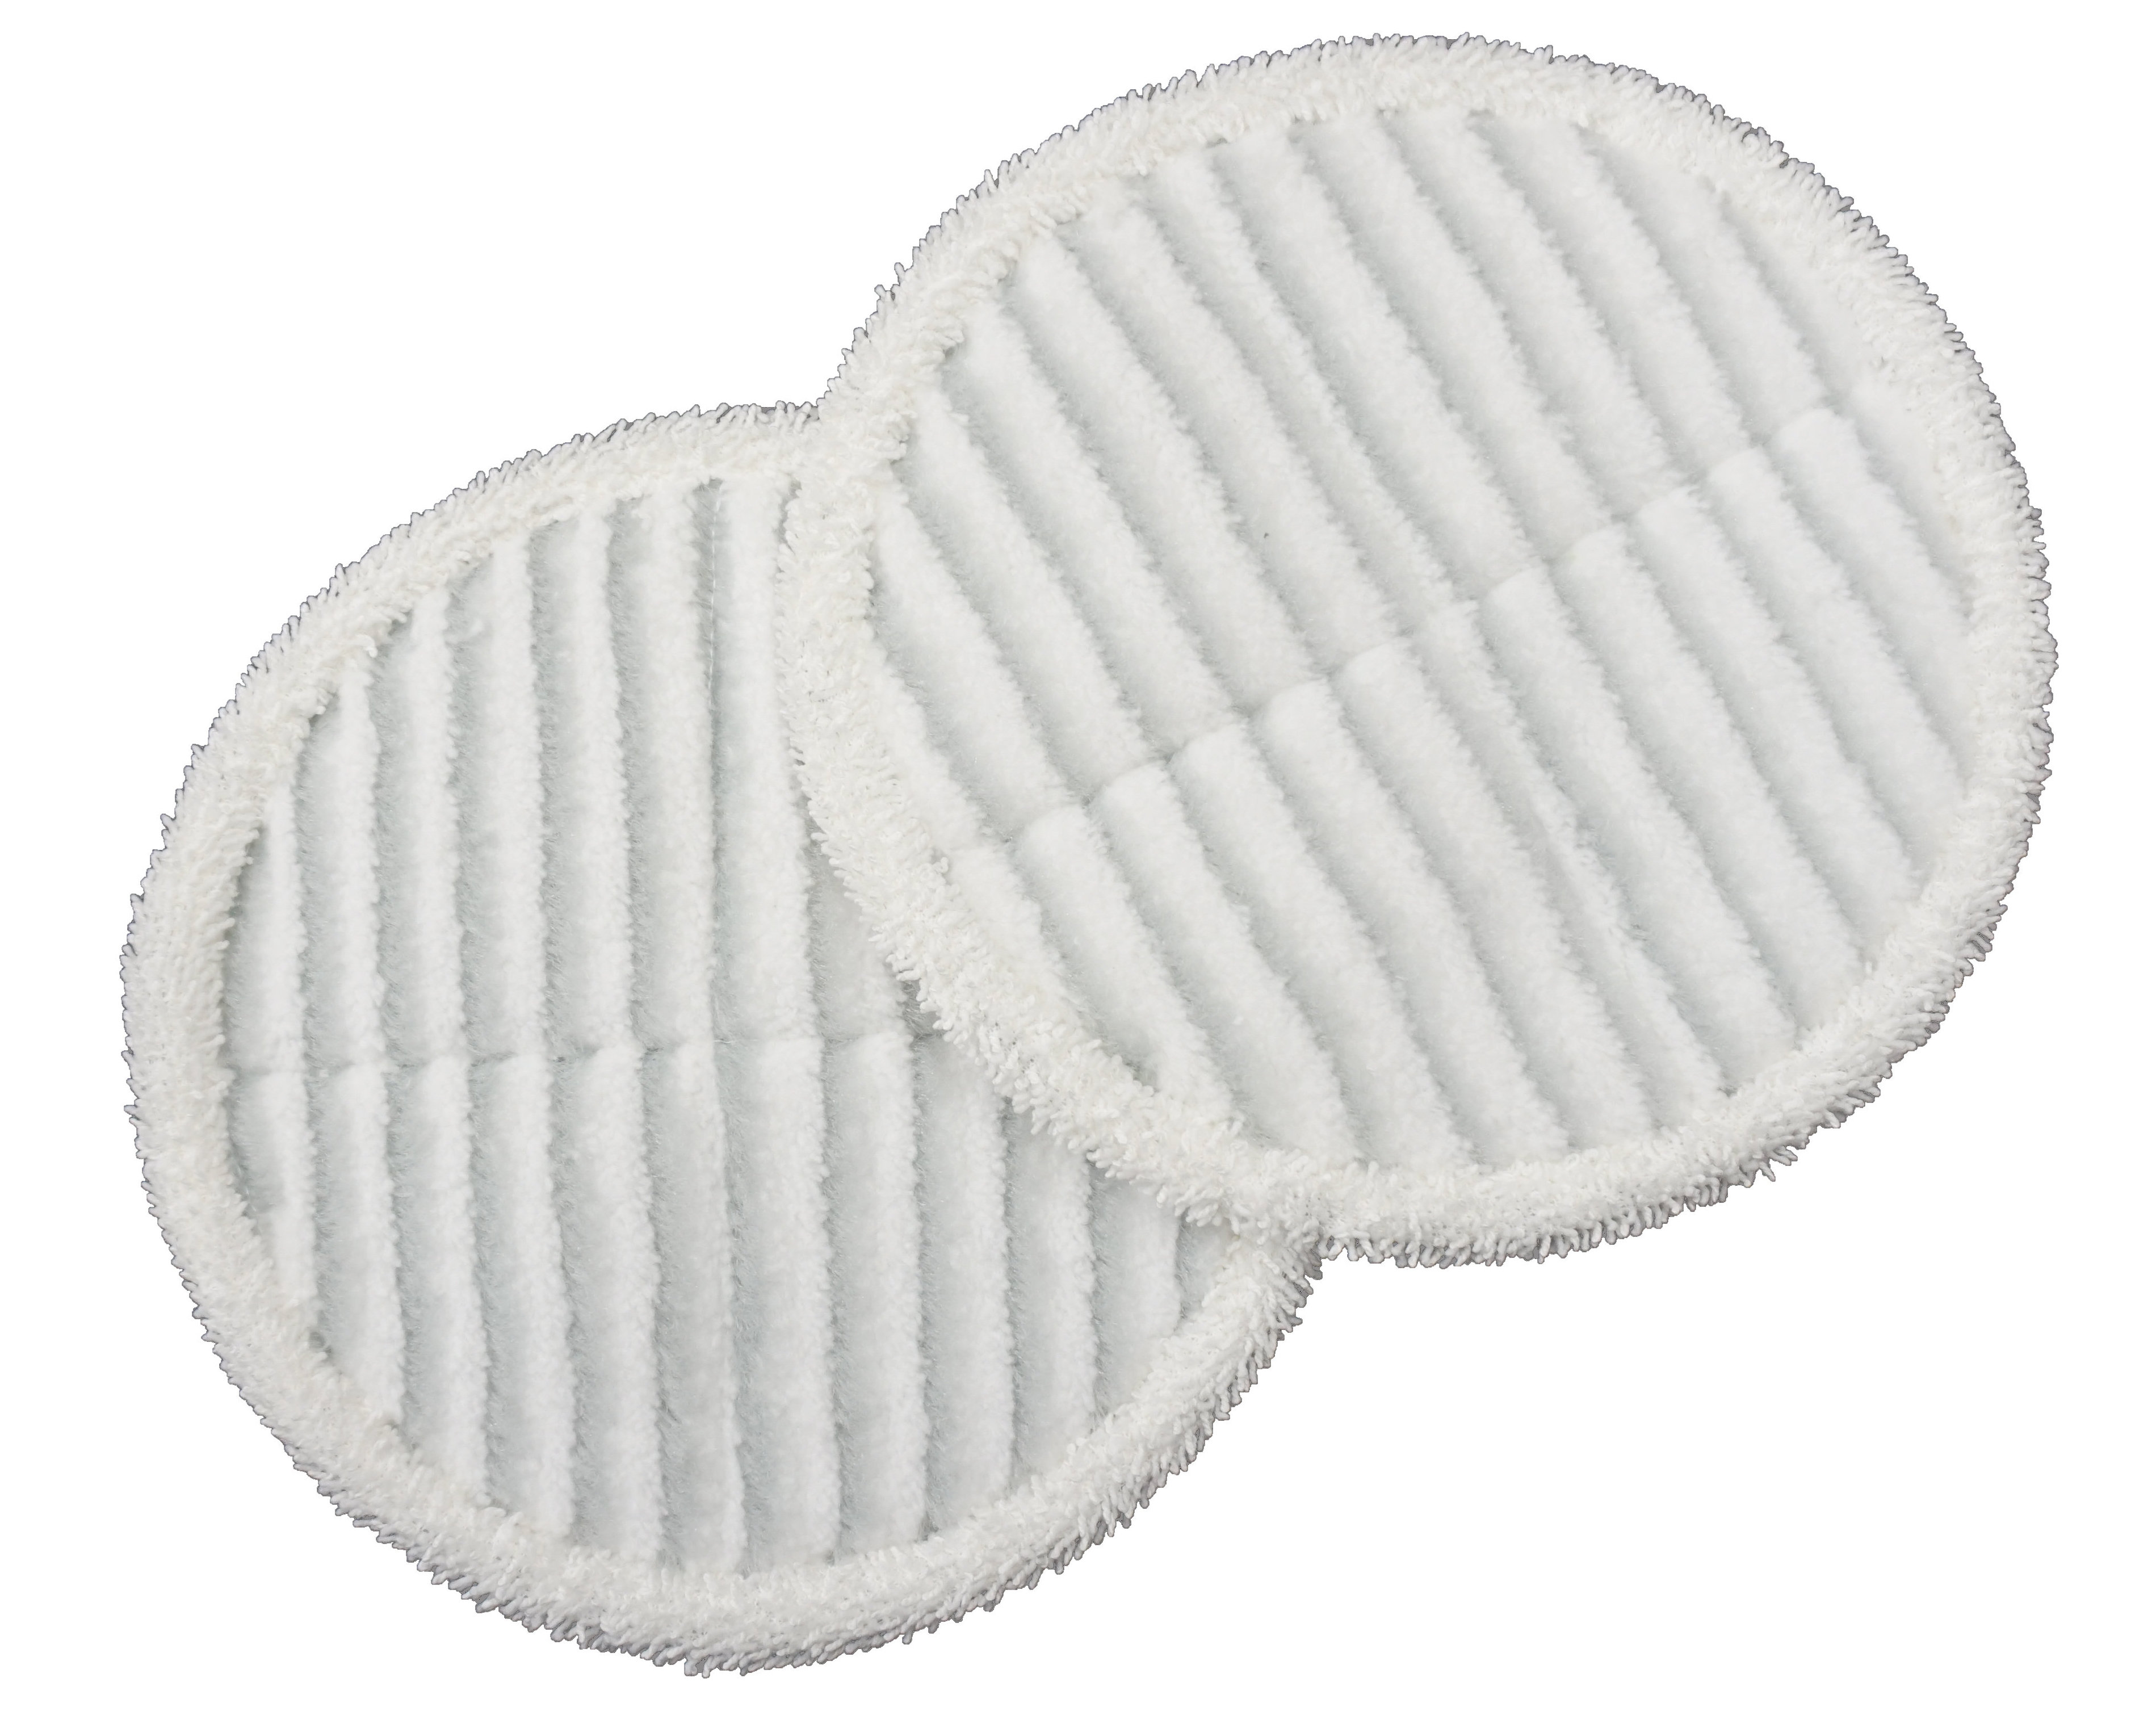 Bissell Scrubby Mop Pads, 5 Pack, 10 Pieces, for Spinwave Hard Floor, 1611298 - image 2 of 3